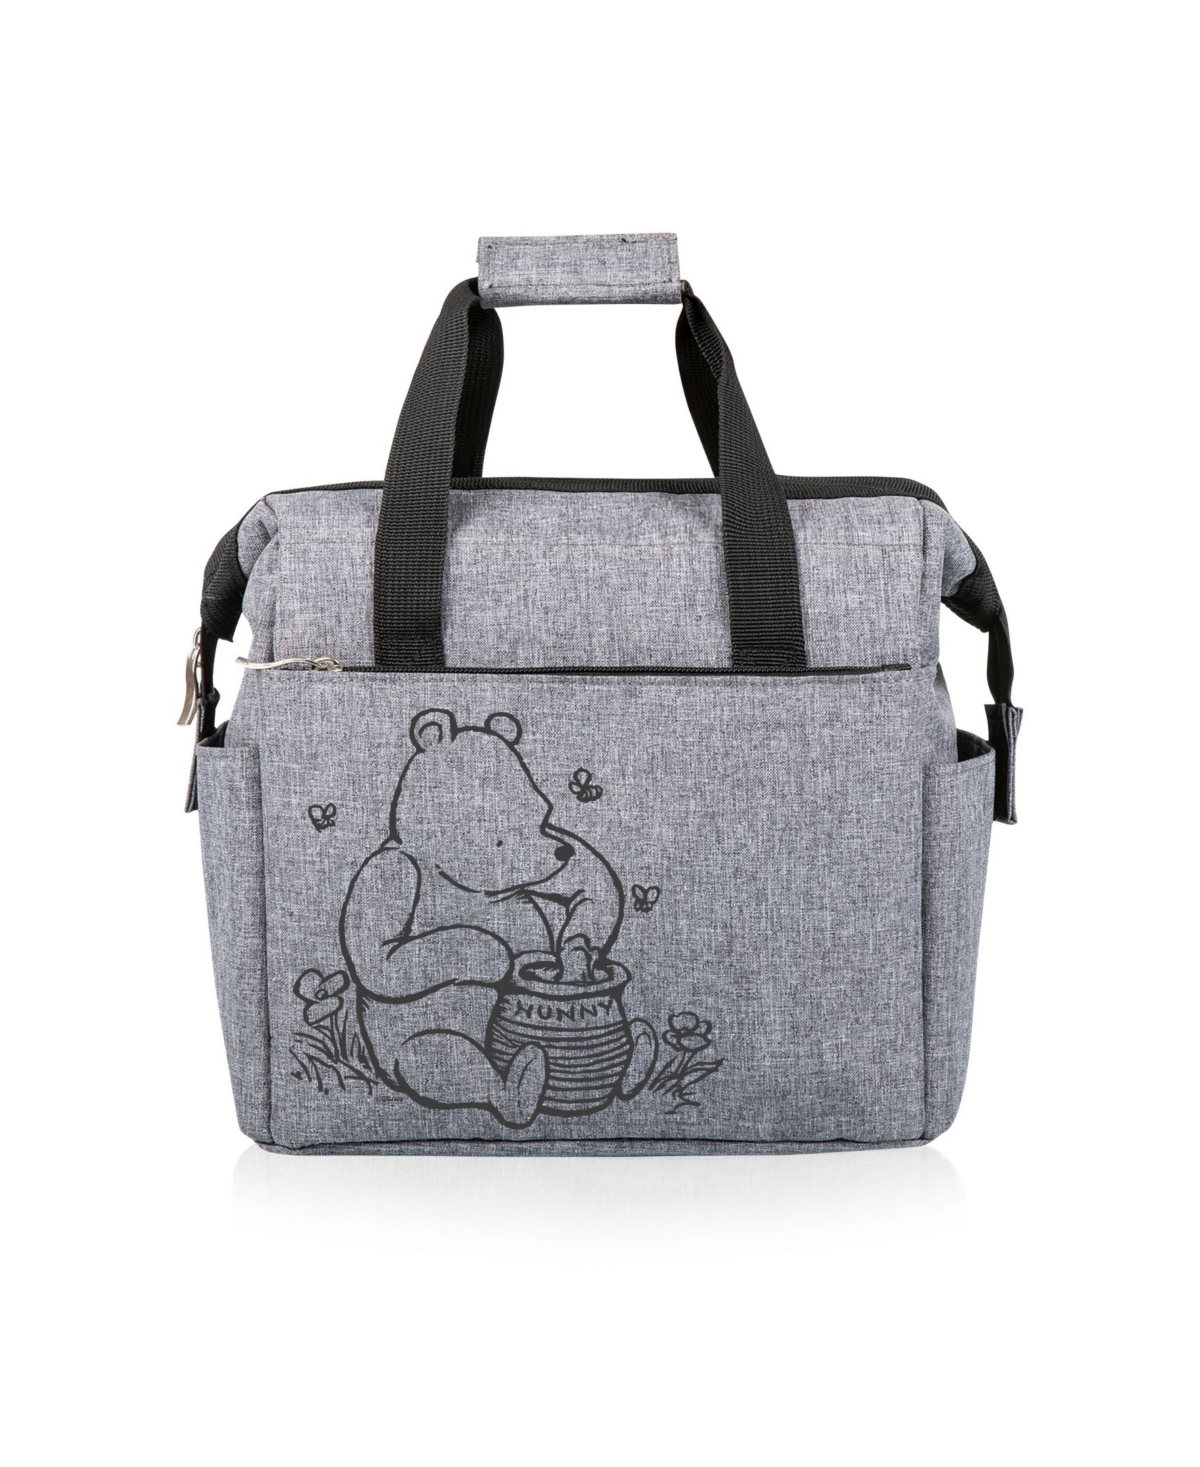 Pooh on the Go Lunch Cooler Tote Bag - Gray